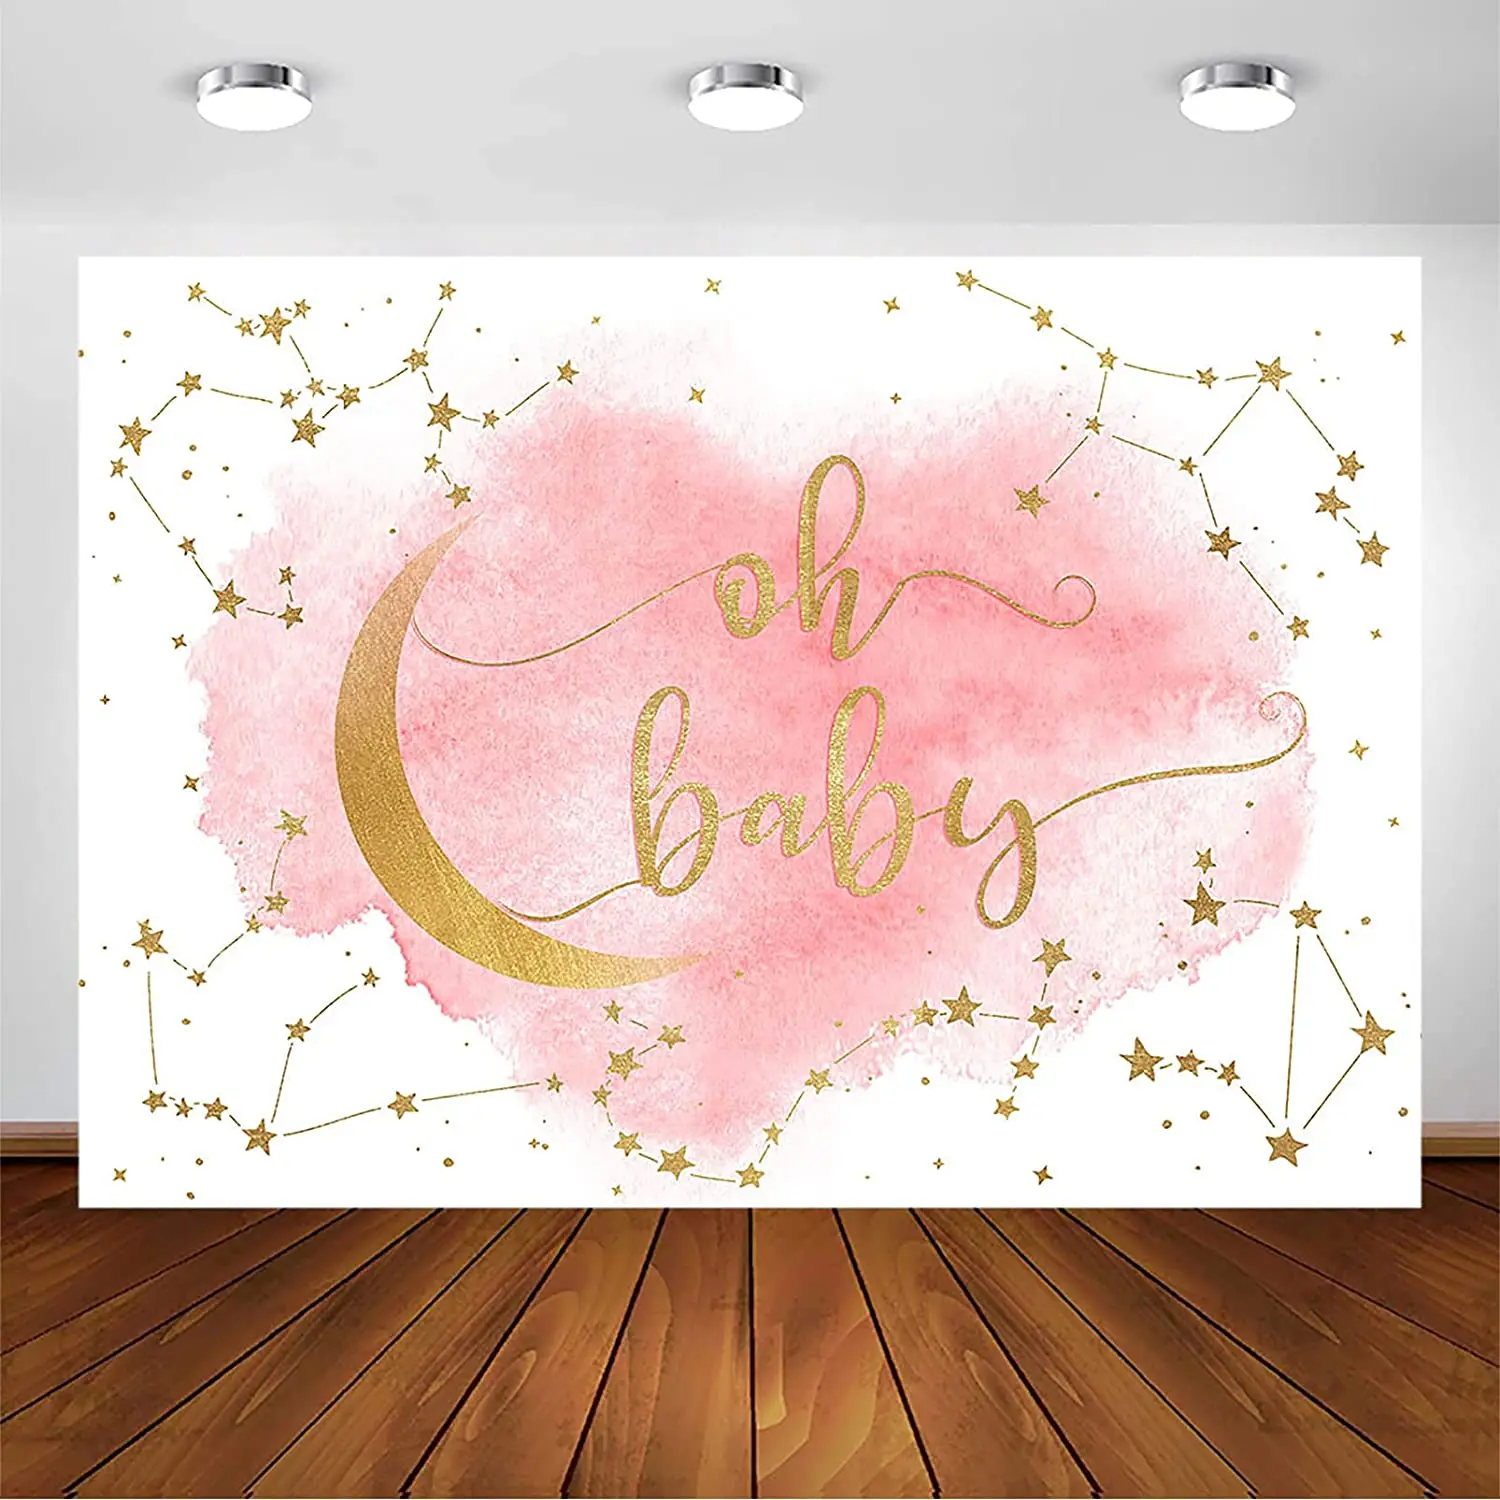 Celestial Baby Backdrop for Girl's Baby Shower Party Decorations Photoshoot Background Twinkle Little Star Moon Pink and Gold